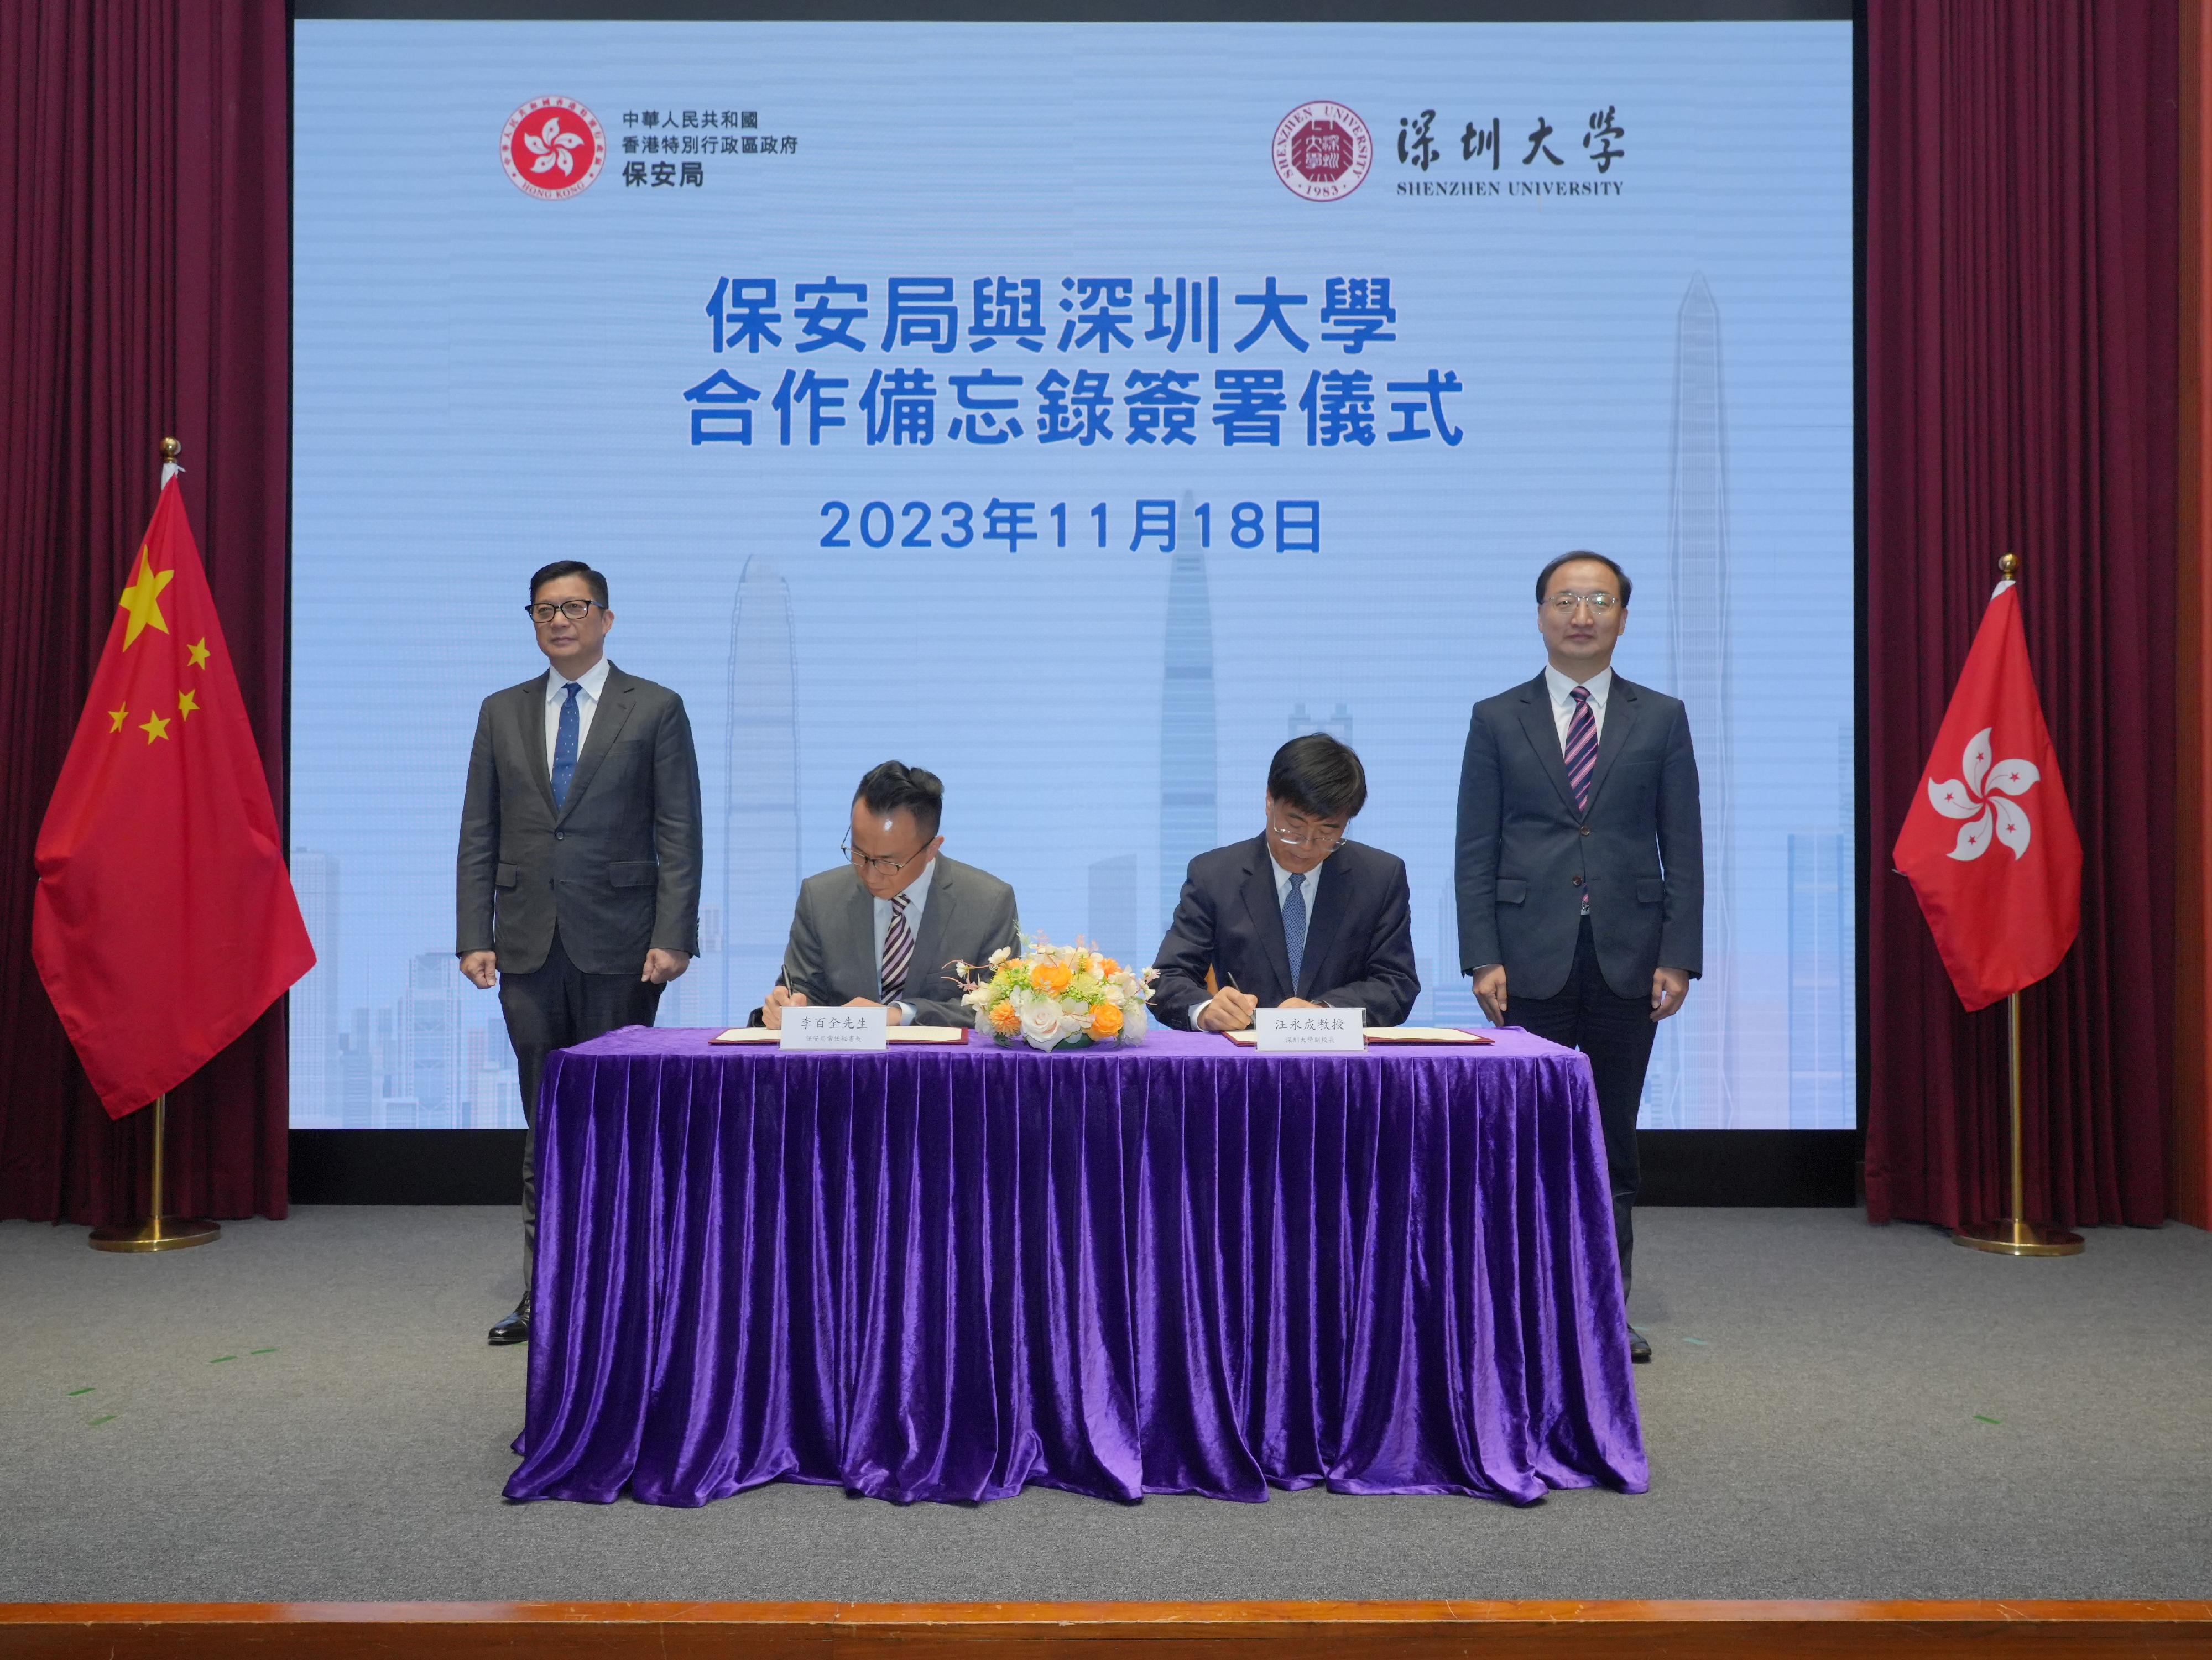 The Security Bureau and Shenzhen University signed a Memorandum of Understanding (MOU) today (November 18) to jointly promote Hong Kong-Shenzhen youth development and co-operation on cultural exchanges. The MOU was signed by the Permanent Secretary for Security, Mr Patrick Li (front row, left), and Vice President of Shenzhen University, Mr Wang Yongcheng (front row, right), and witnessed by the Secretary for Security, Mr Tang Ping-keung (back row, left), and the Director General of the Youth Department of the Liaison Office of the Central People's Government in the Hong Kong Special Administrative Region, Mr Zhang Zhihua (back row, right).